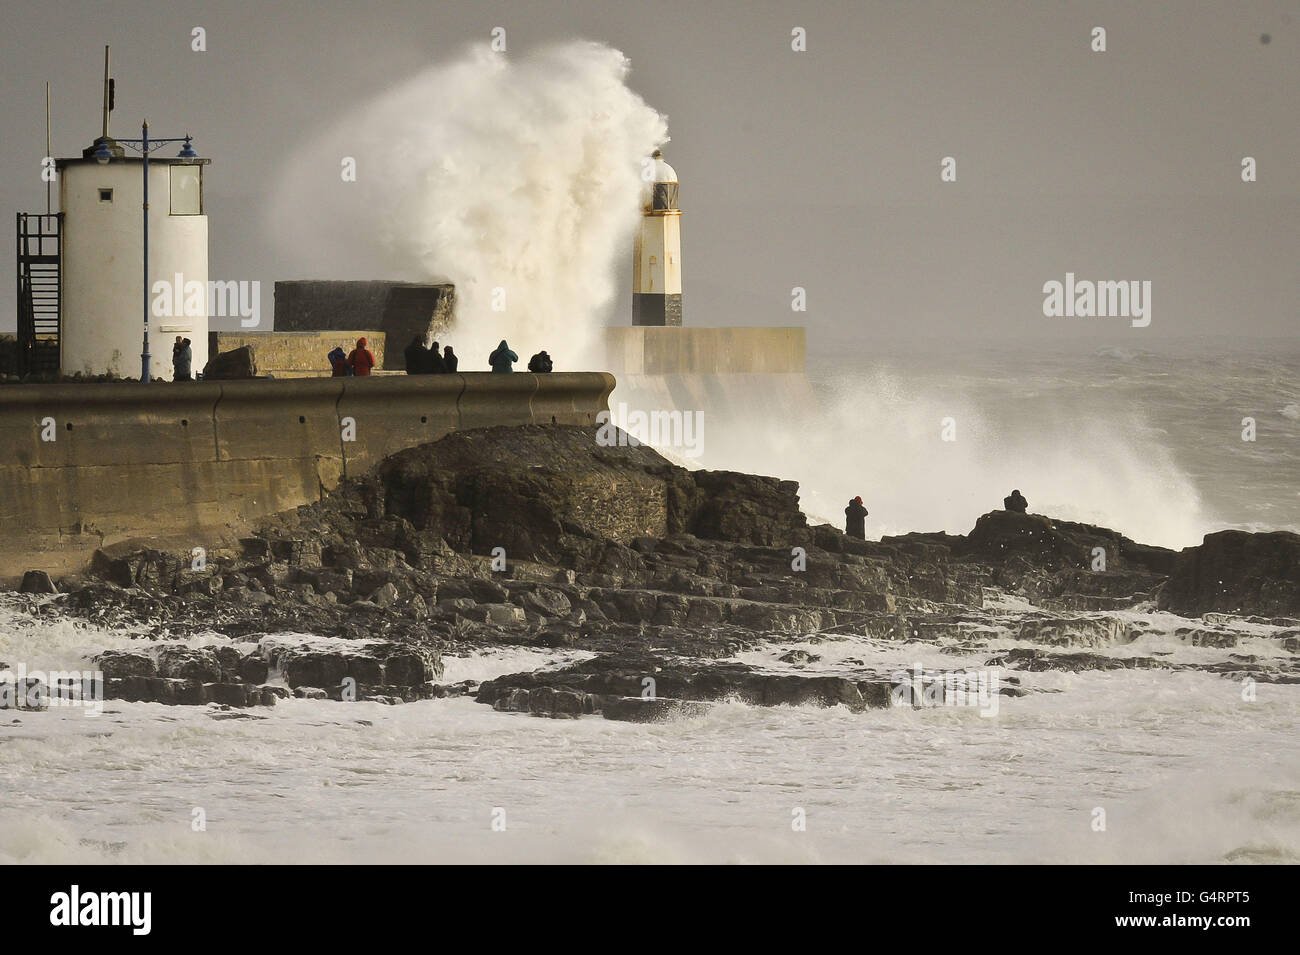 People watch as waves crash against the harbour wall at Porthcawl in South Wales as fierce storms battered Britain today, with heavy rain and winds gusting up to 85mph. Stock Photo